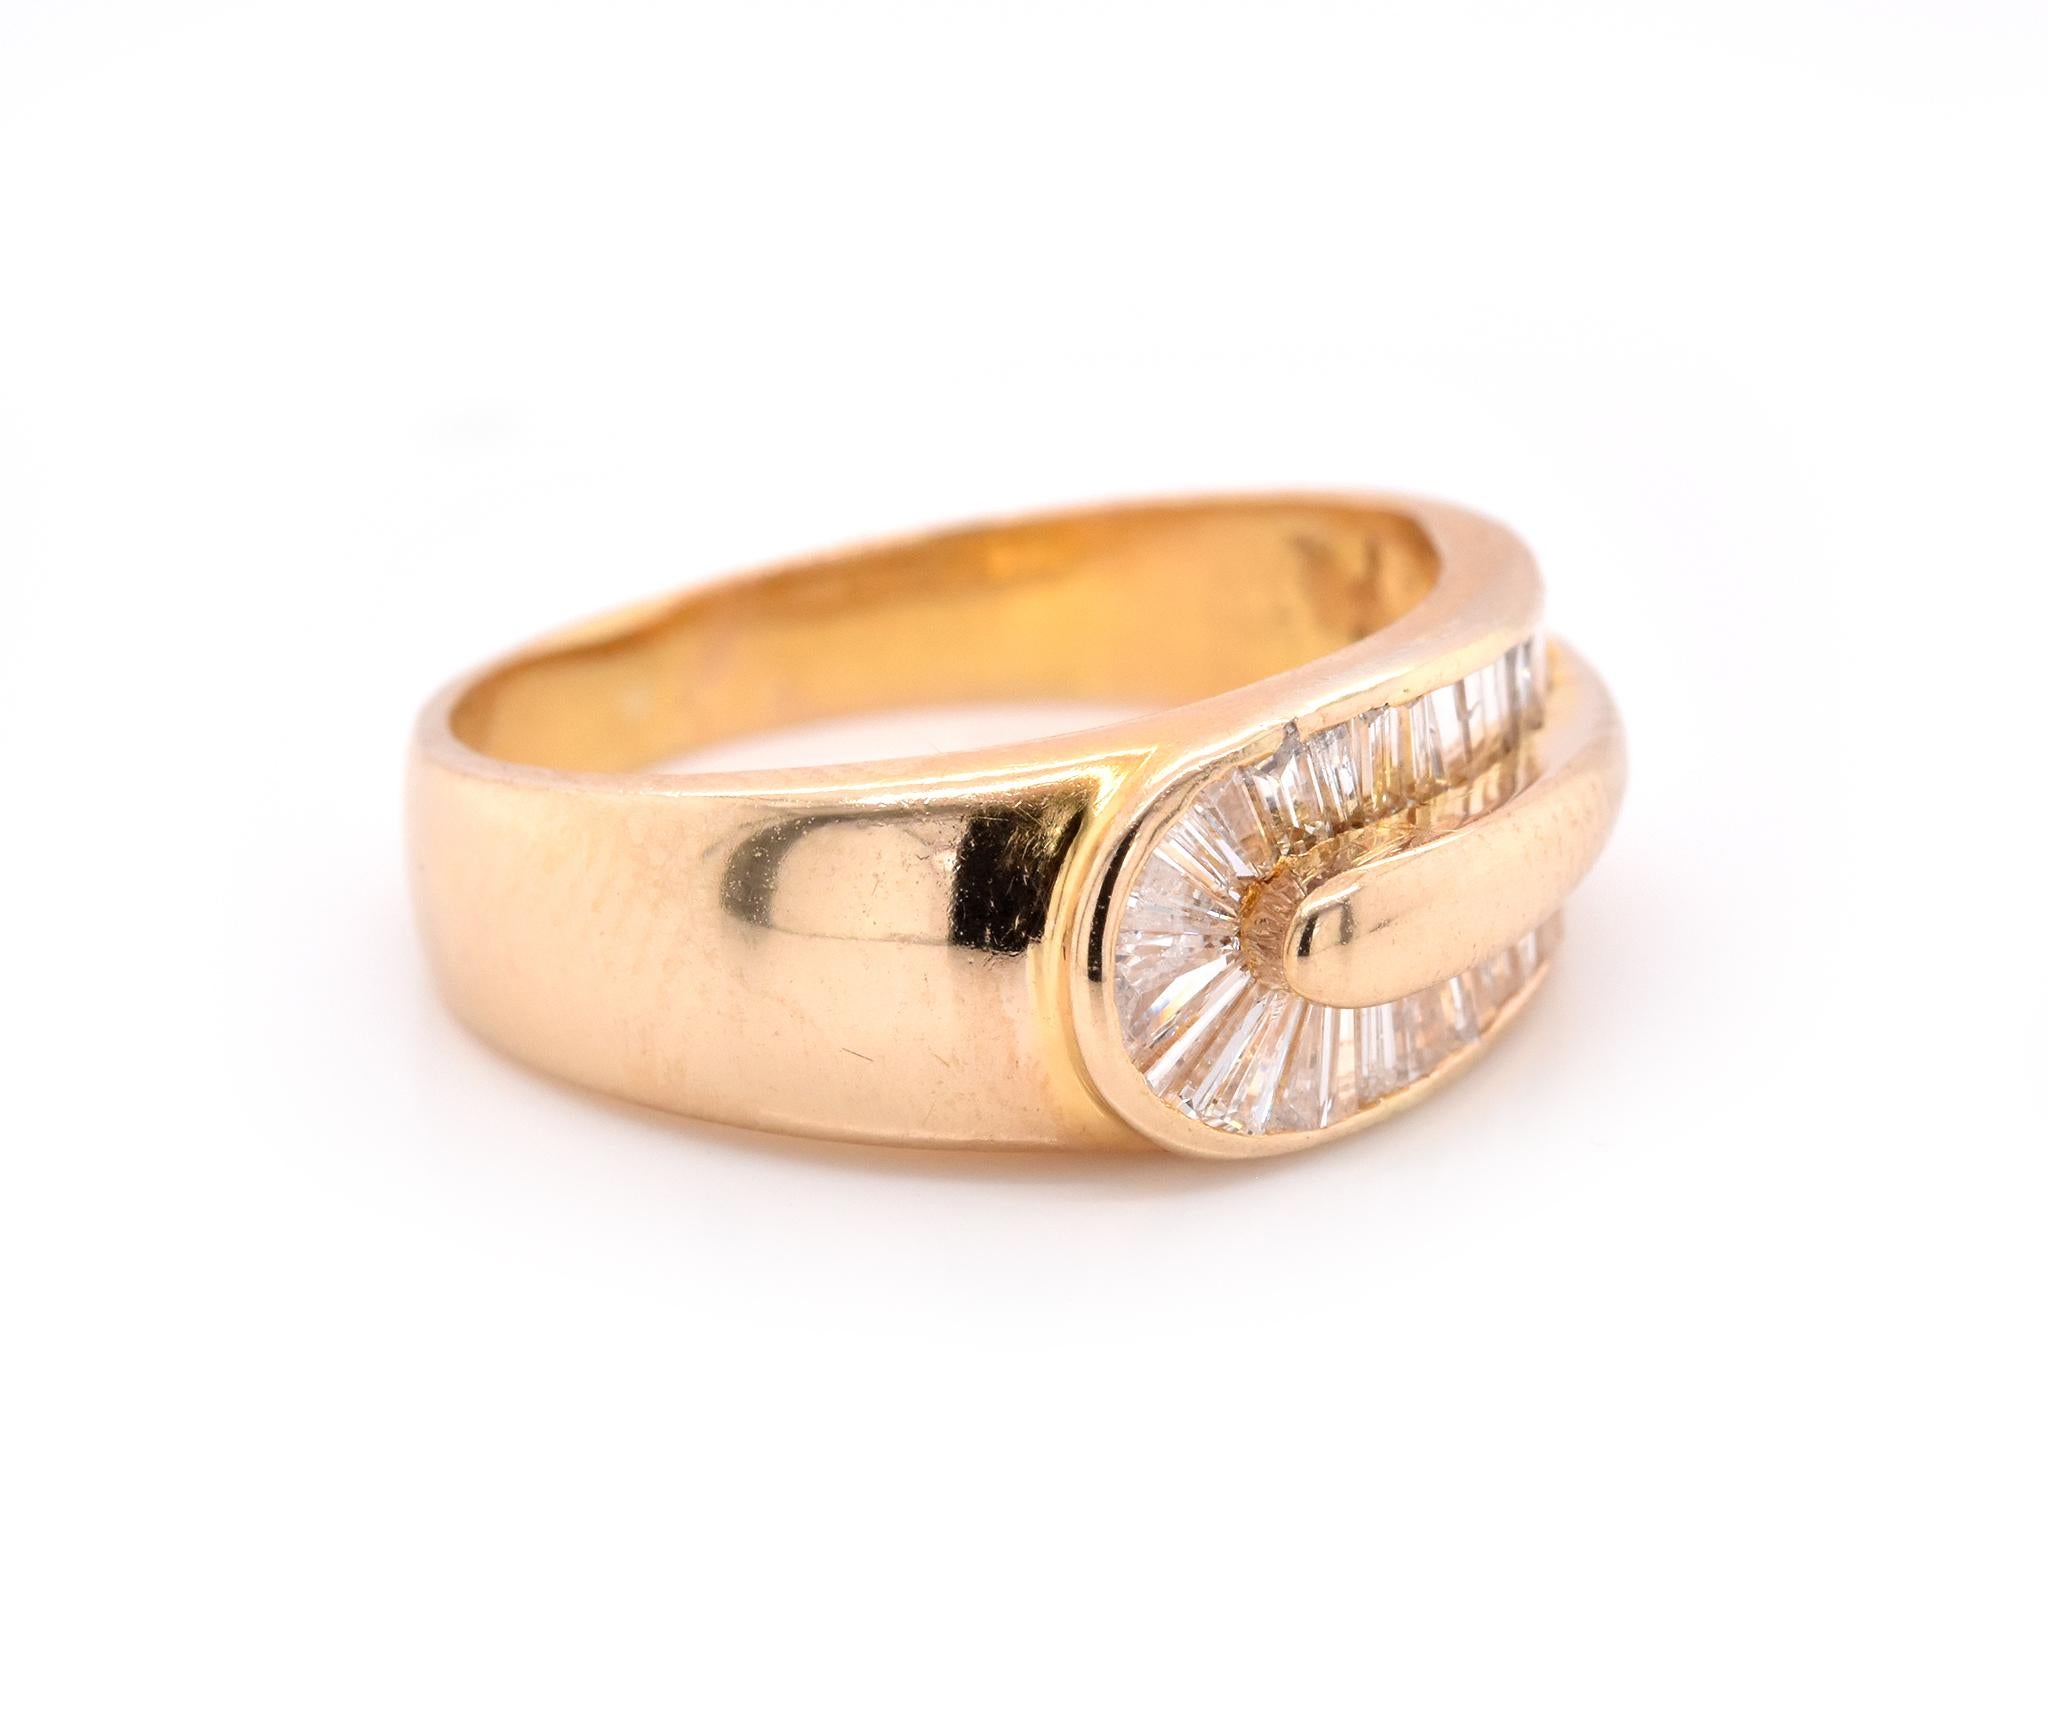 Designer: custom 
Material: 14K yellow
Diamonds: 31 baguette cut = .40cttw
Color: H
Clarity: SI
Ring Size: 5
Dimensions: ring is 3.7mm wide
Weight: 3.95 grams
